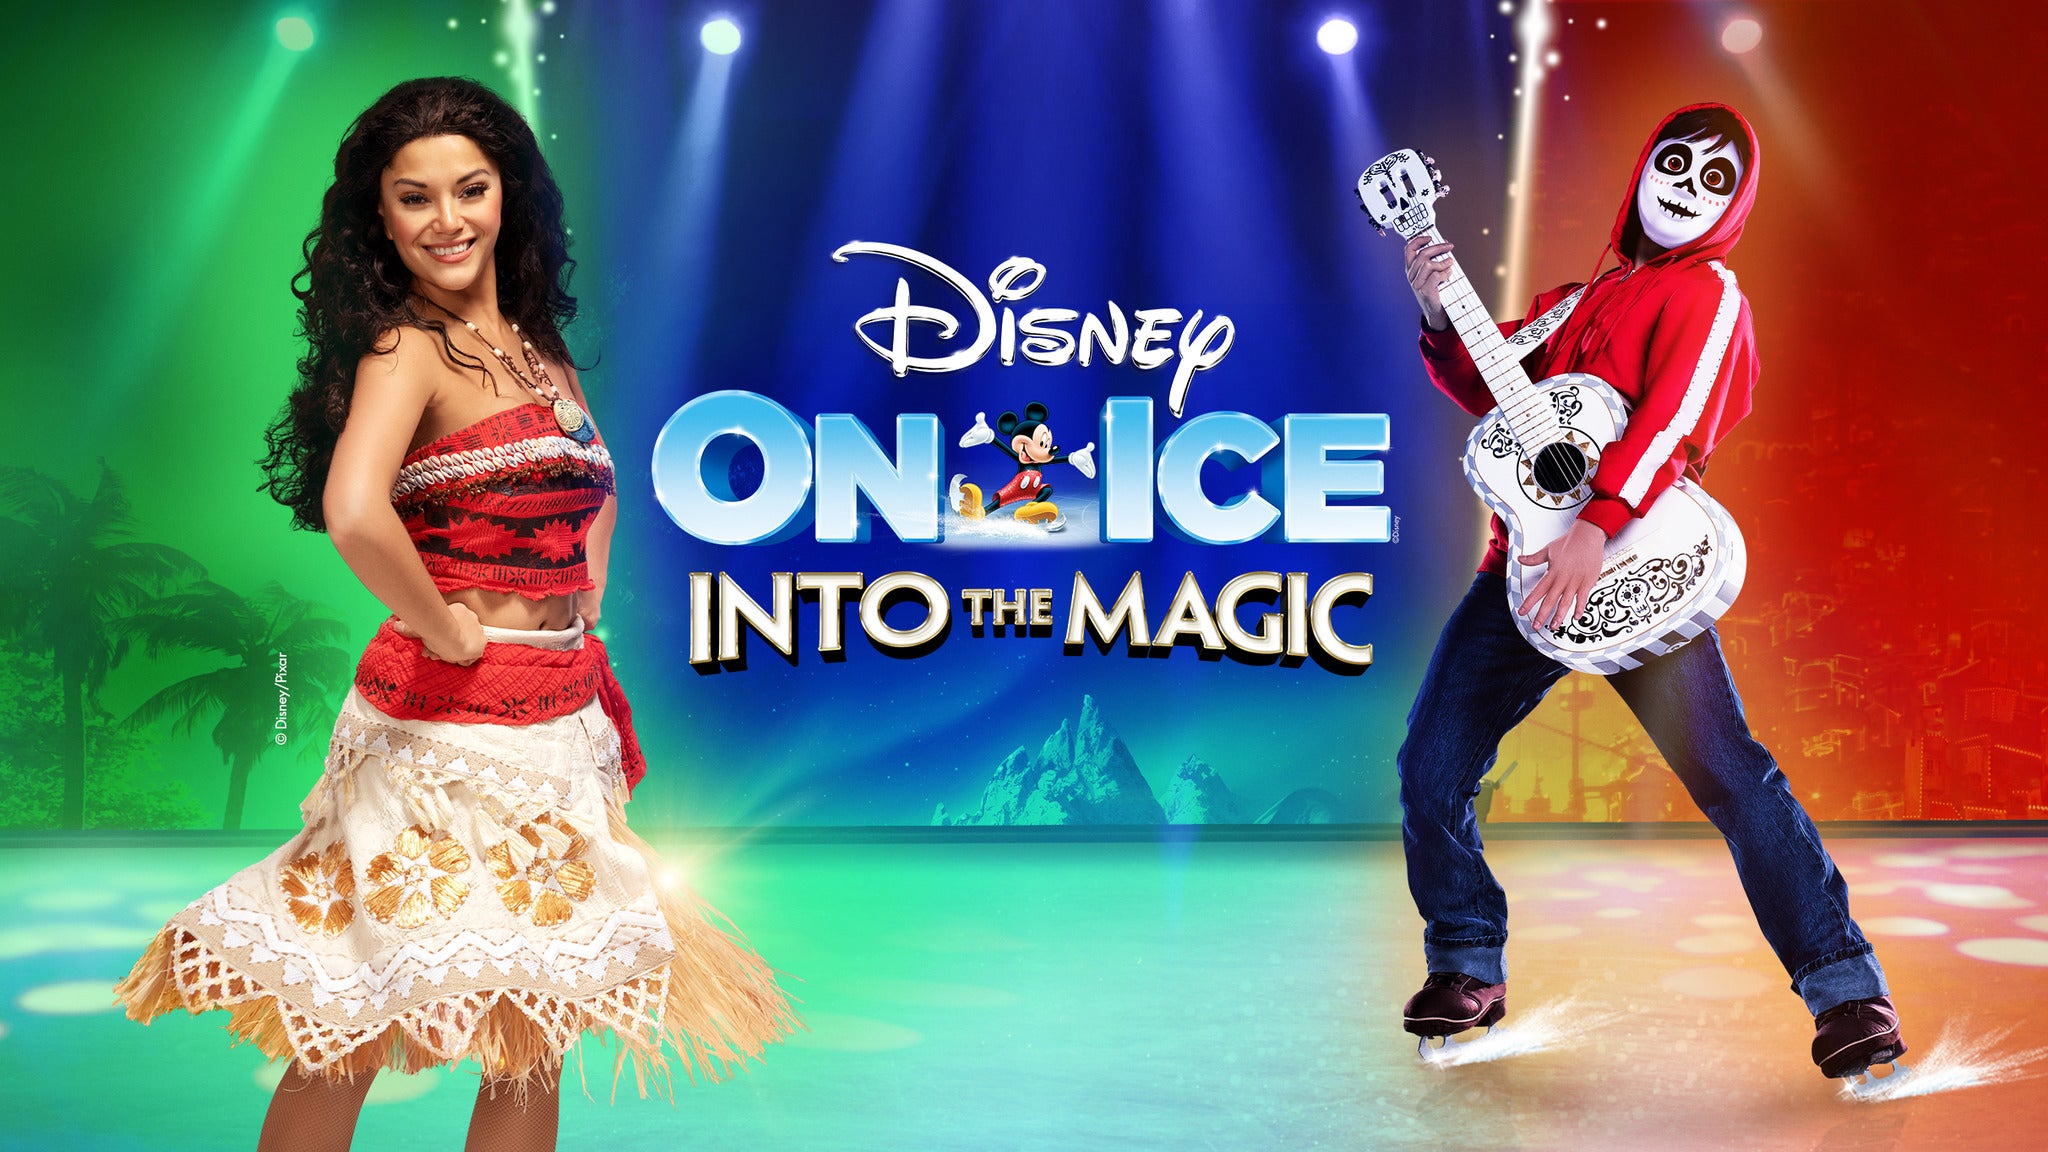 Disney On Ice presents Into the Magic in Salt Lake City event information